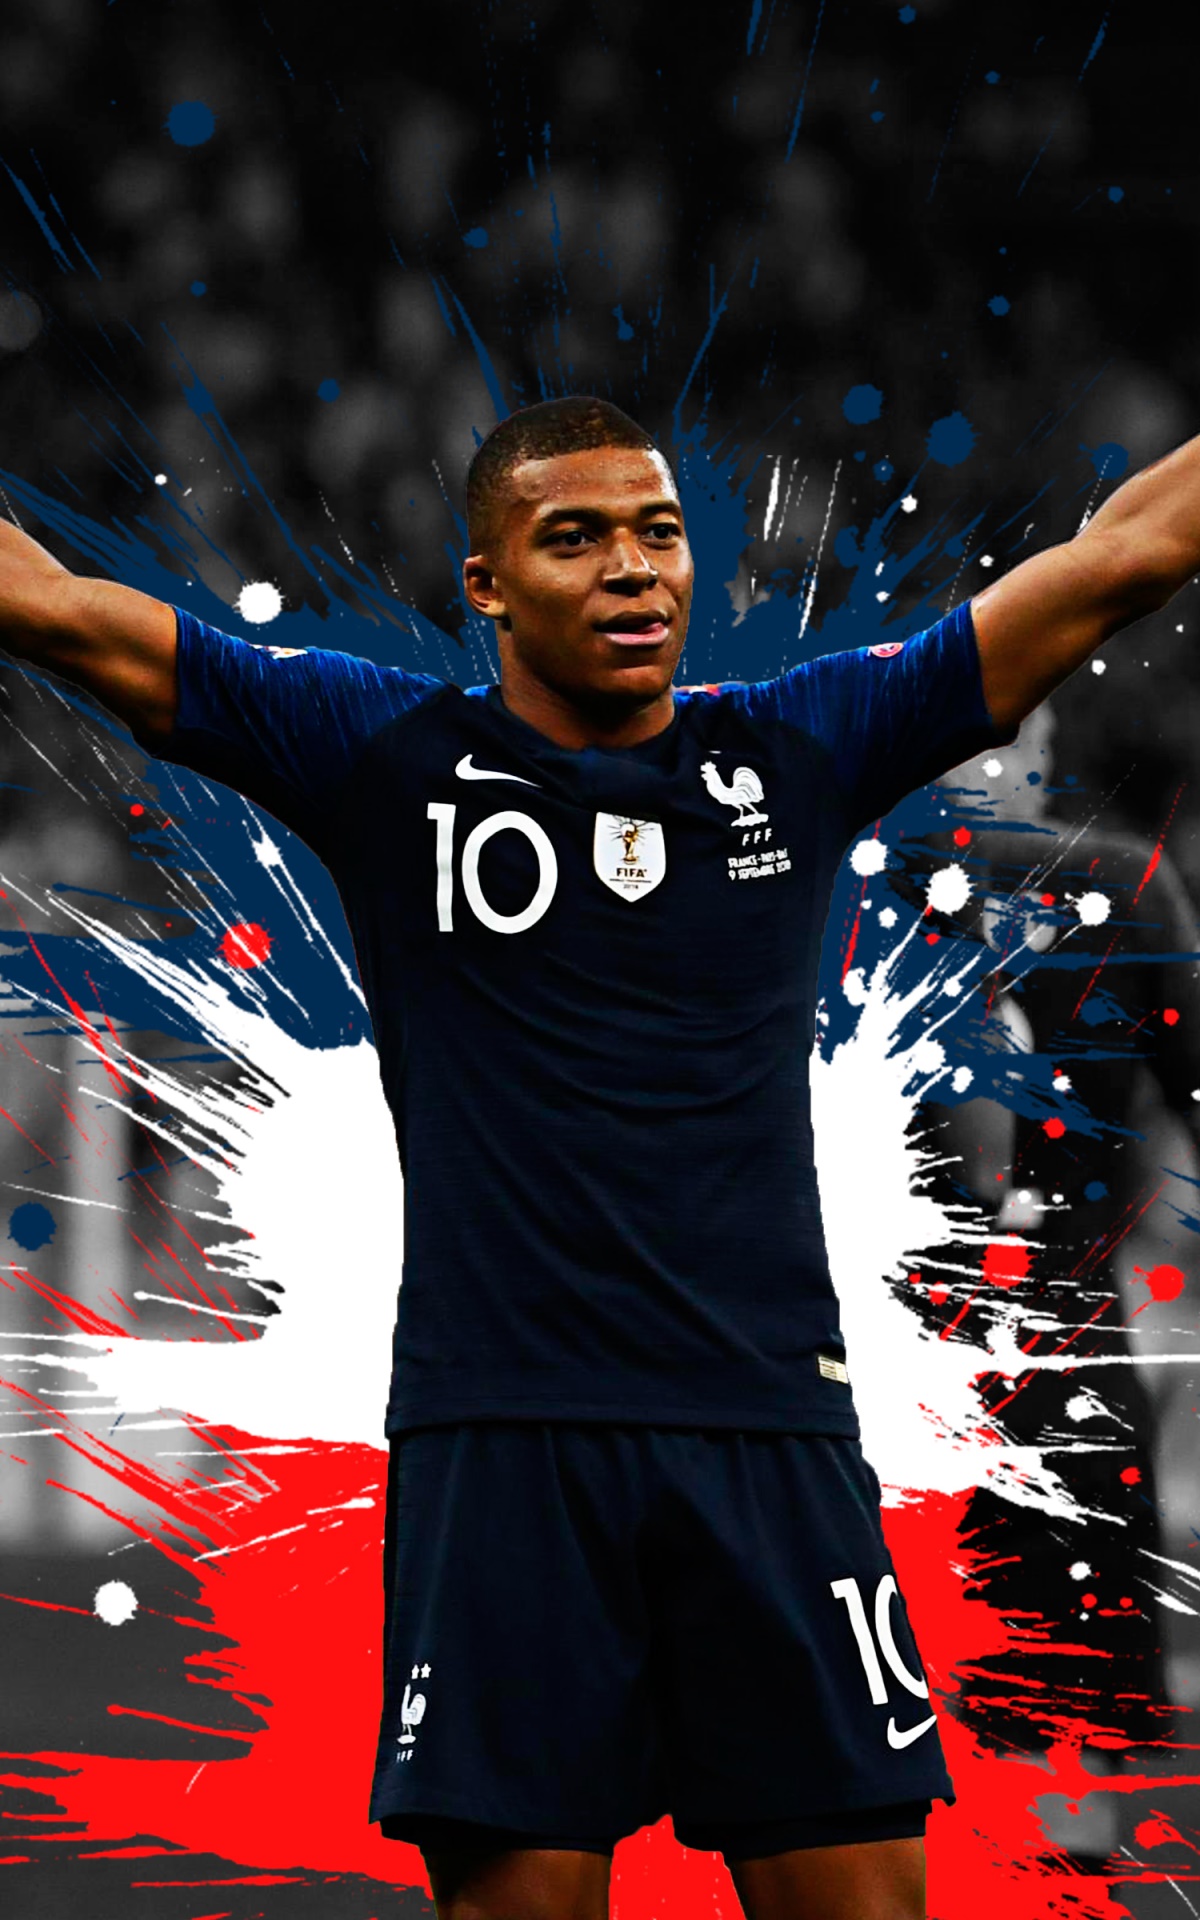 Wallpapers ID: 342665 / Sports Kylian Mbappé Phone Wallpaper, Soccer, French, 1200x1920 free download